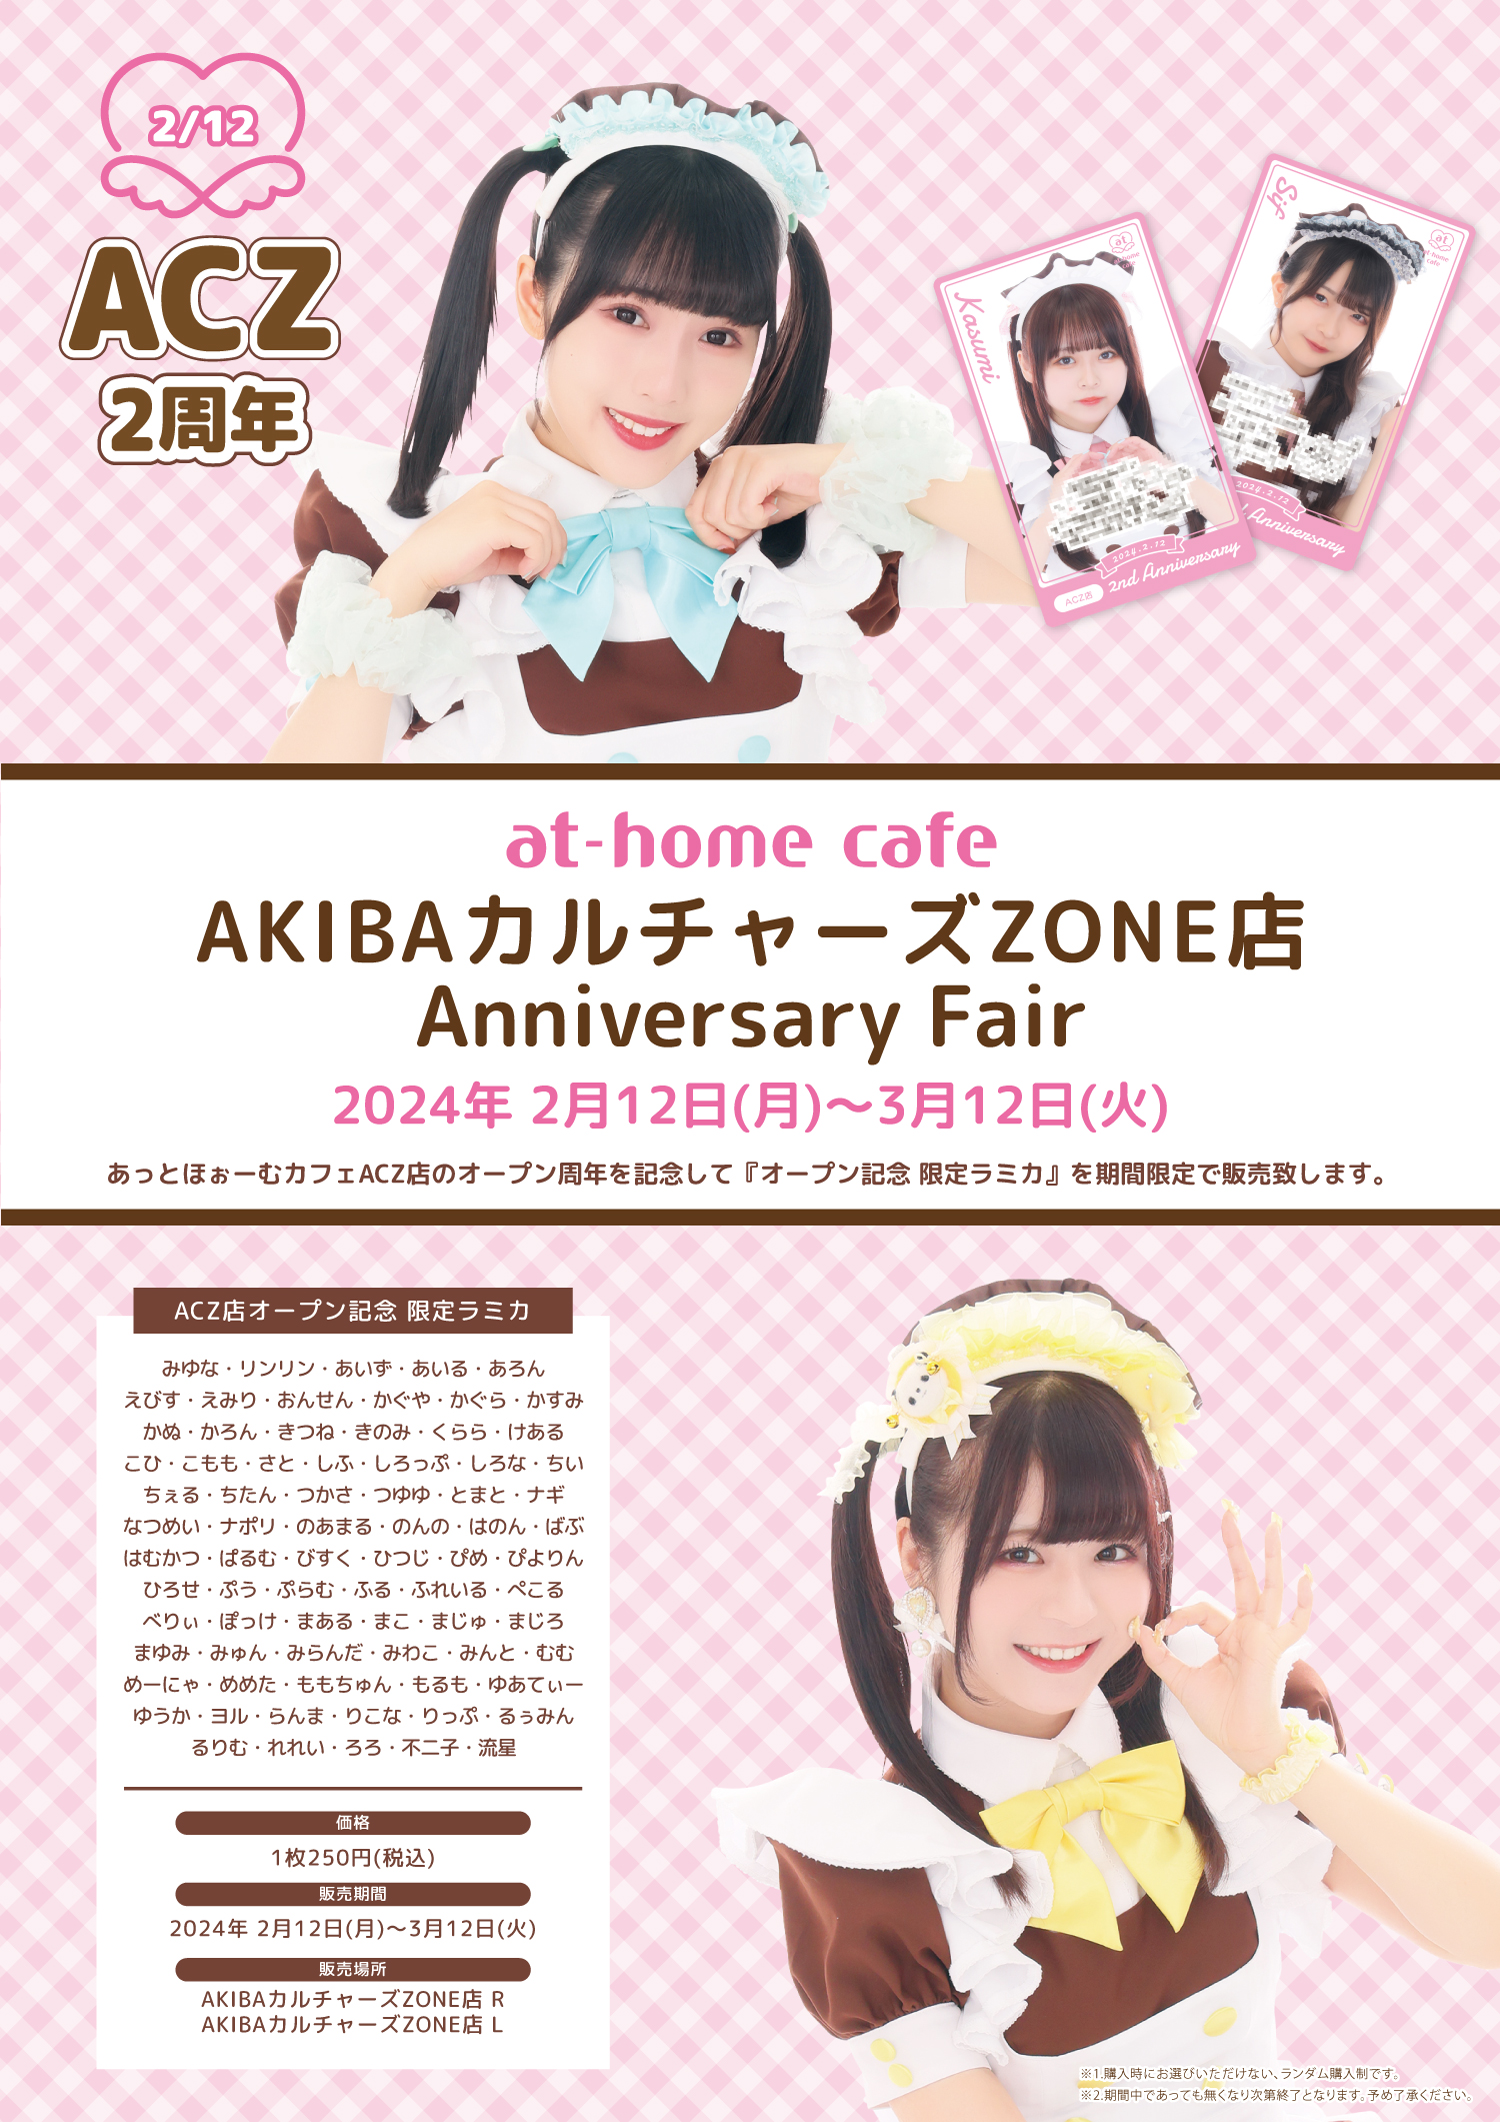 ☆at-home cafe AKIBAカルチャーズZONE店 2nd Anniversary Fair 